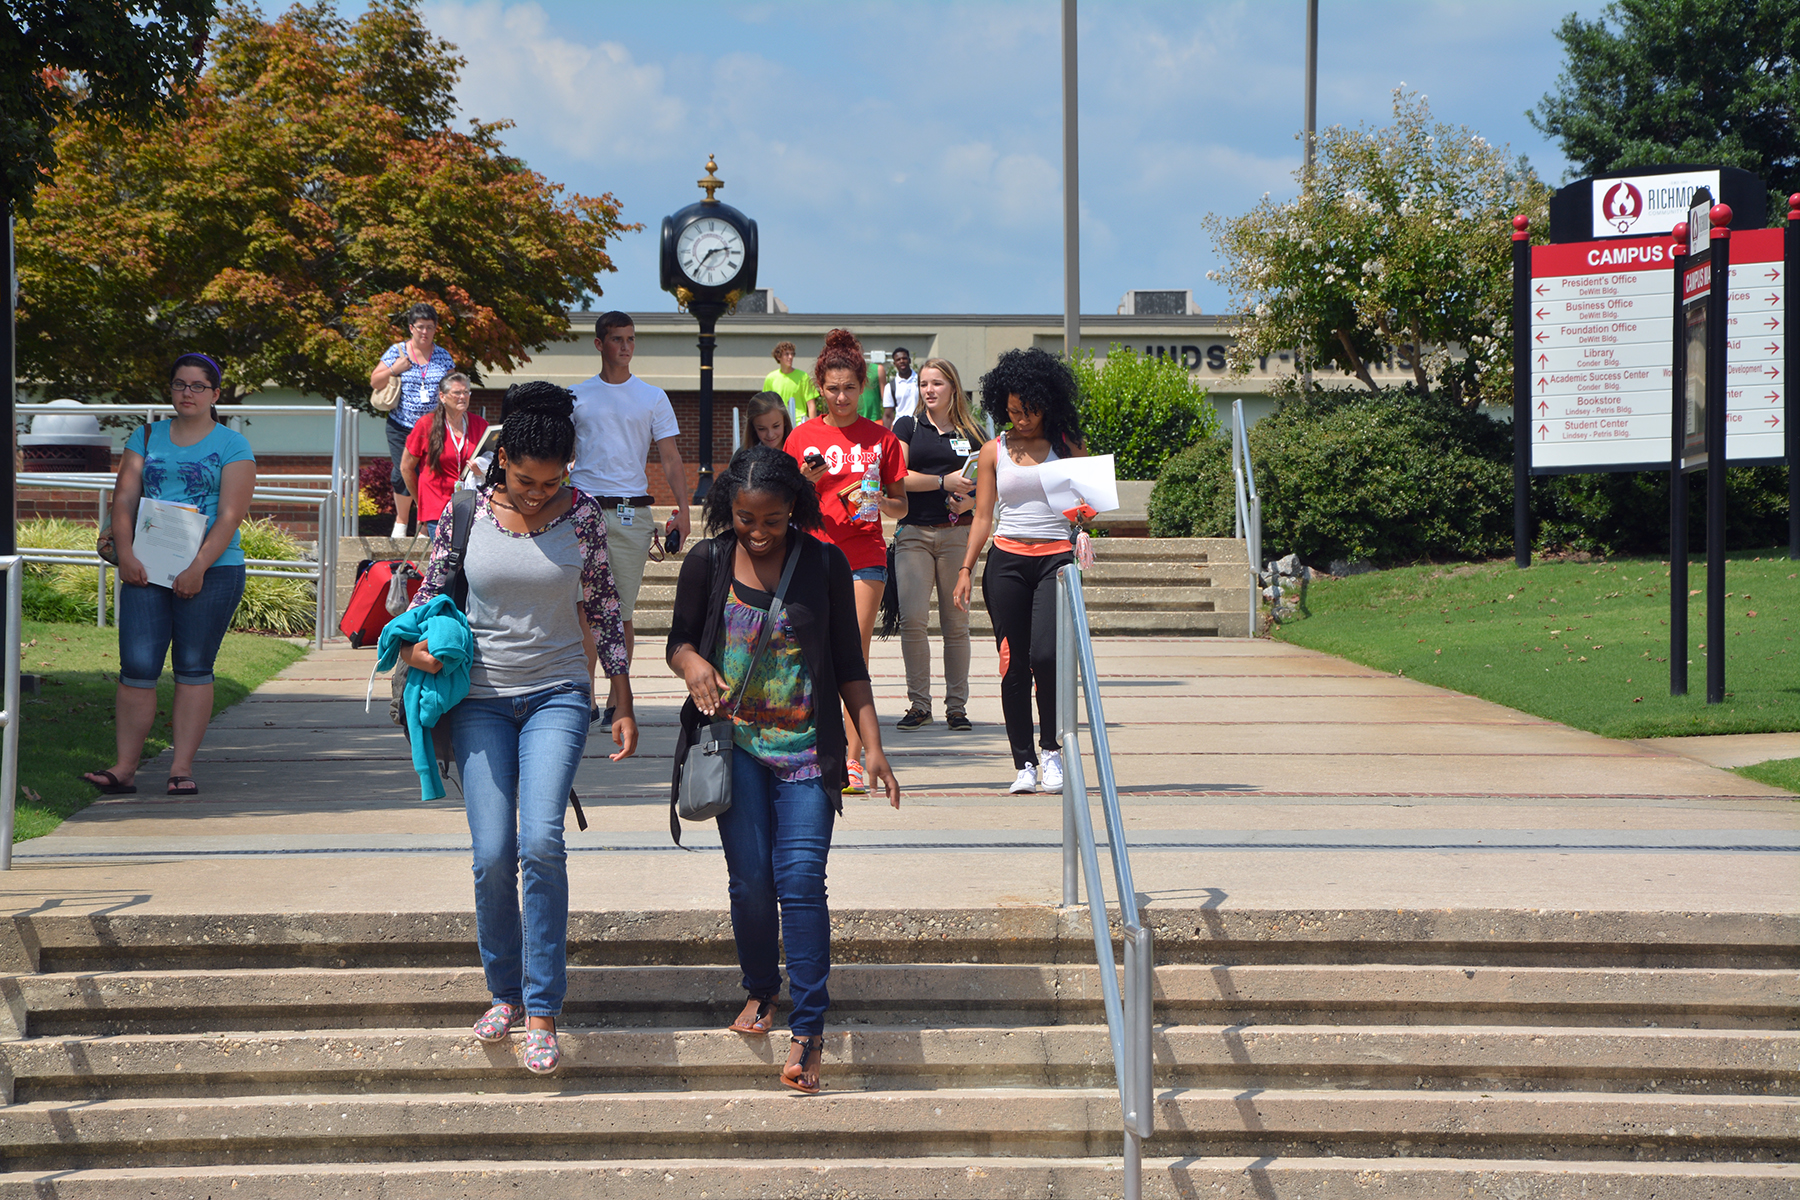 Students walking across campus with clock in background